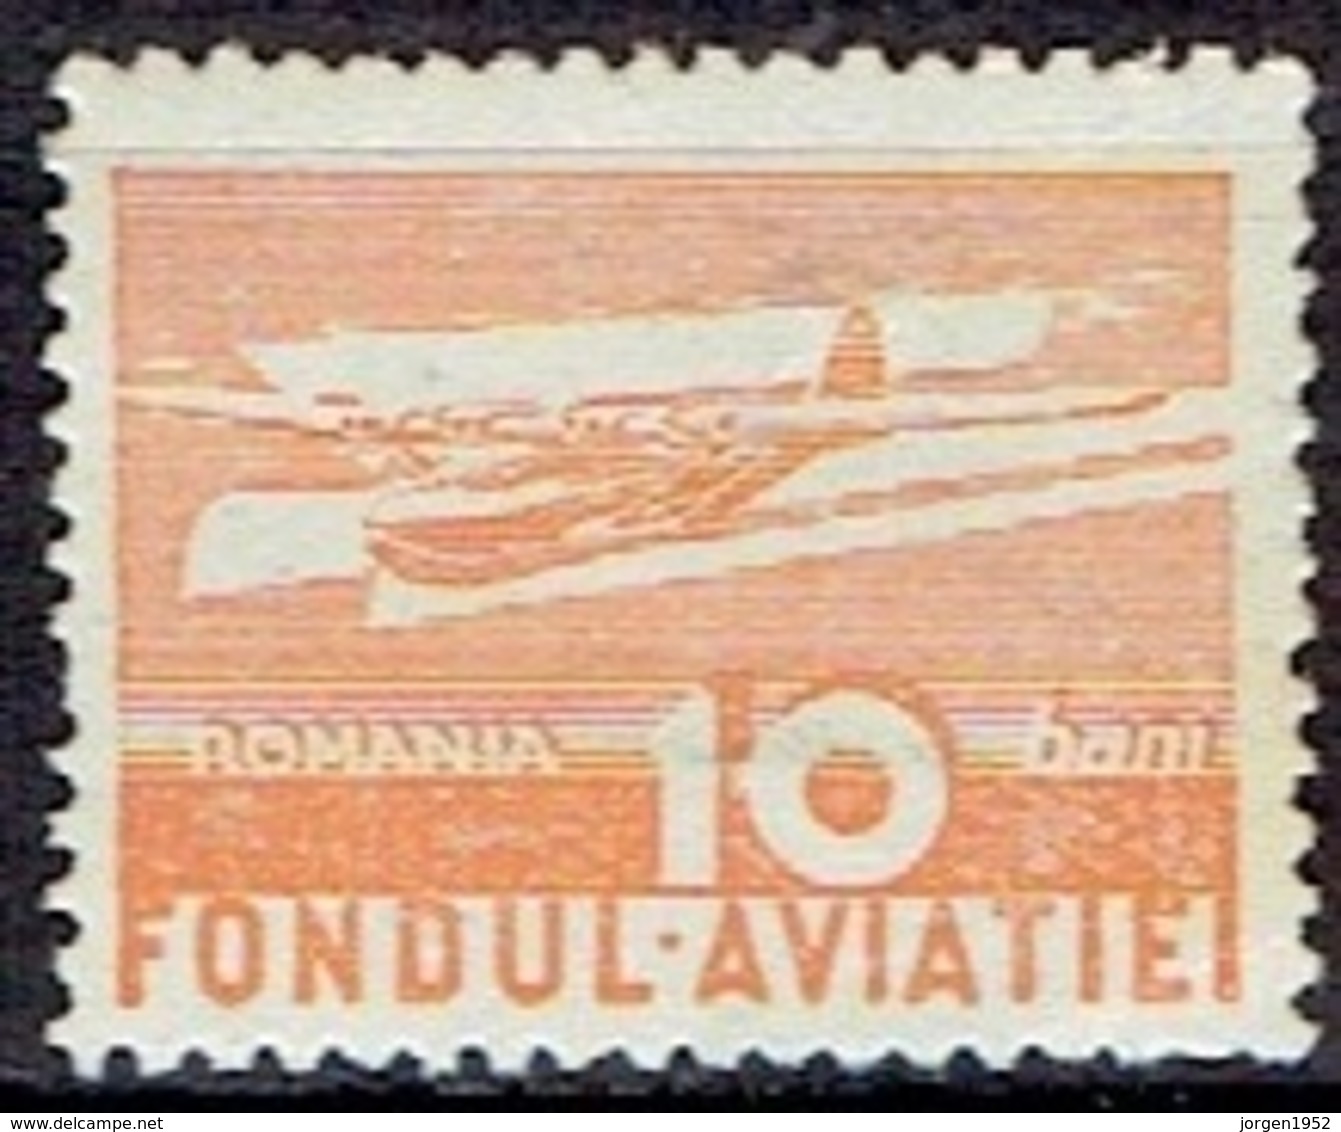 ROMANIA # FROM 1949 * - Oficiales